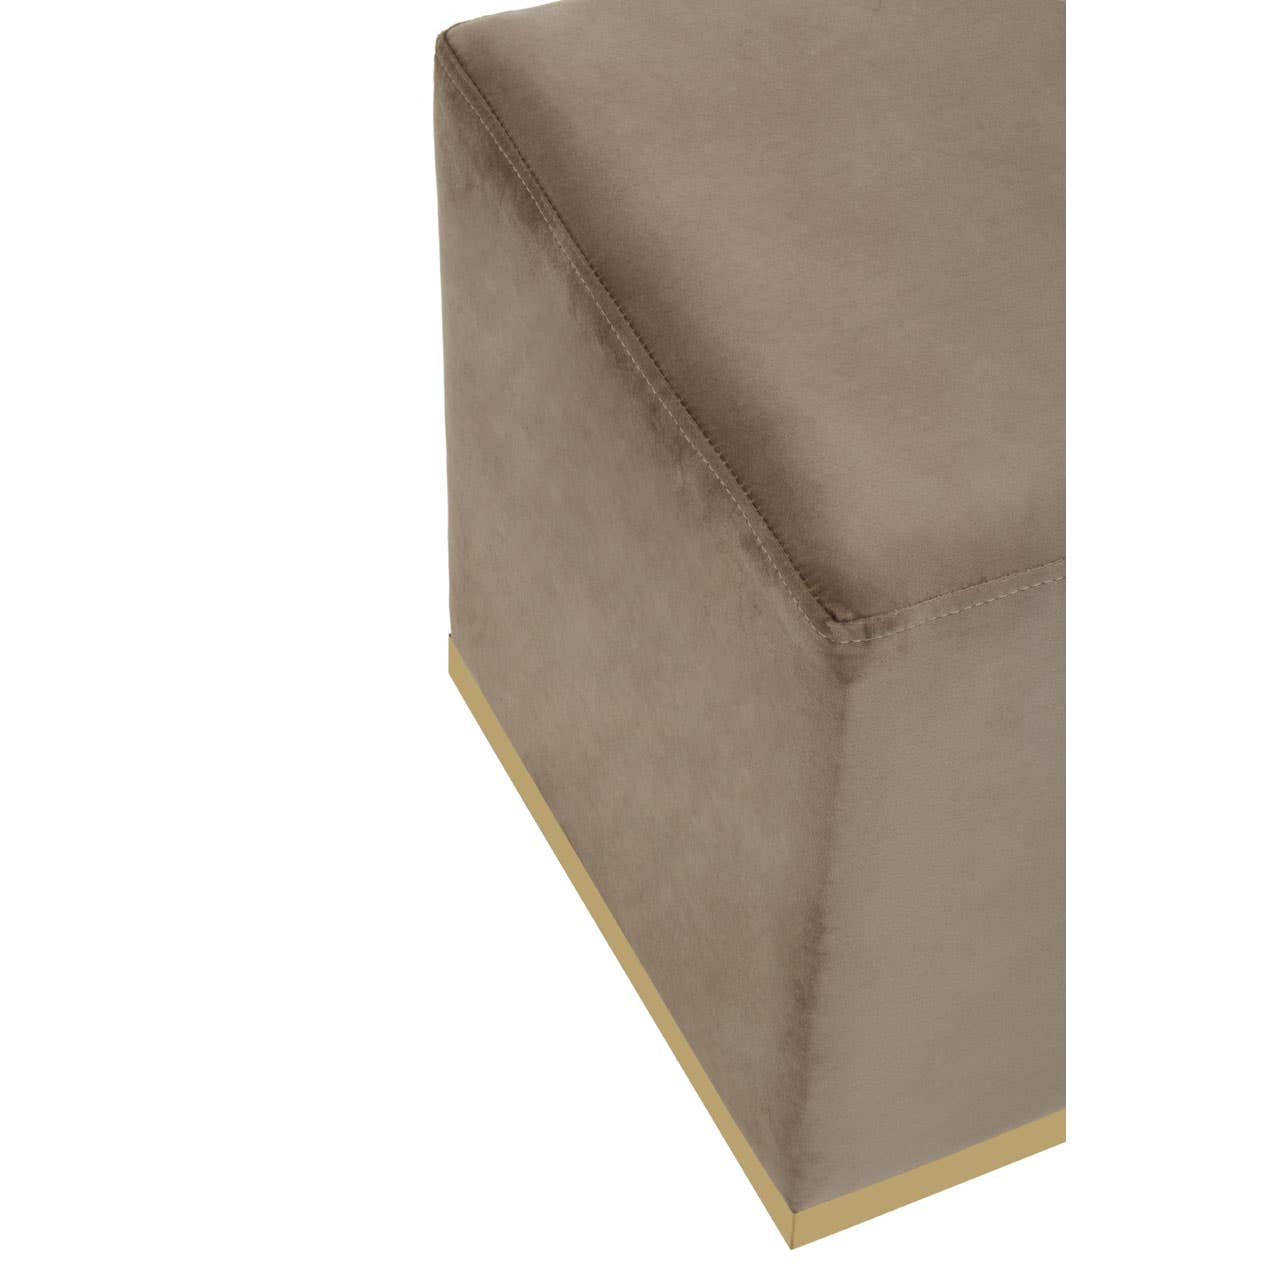 Noosa & Co. Living Hagen Mink And Gold Square Stool House of Isabella UK